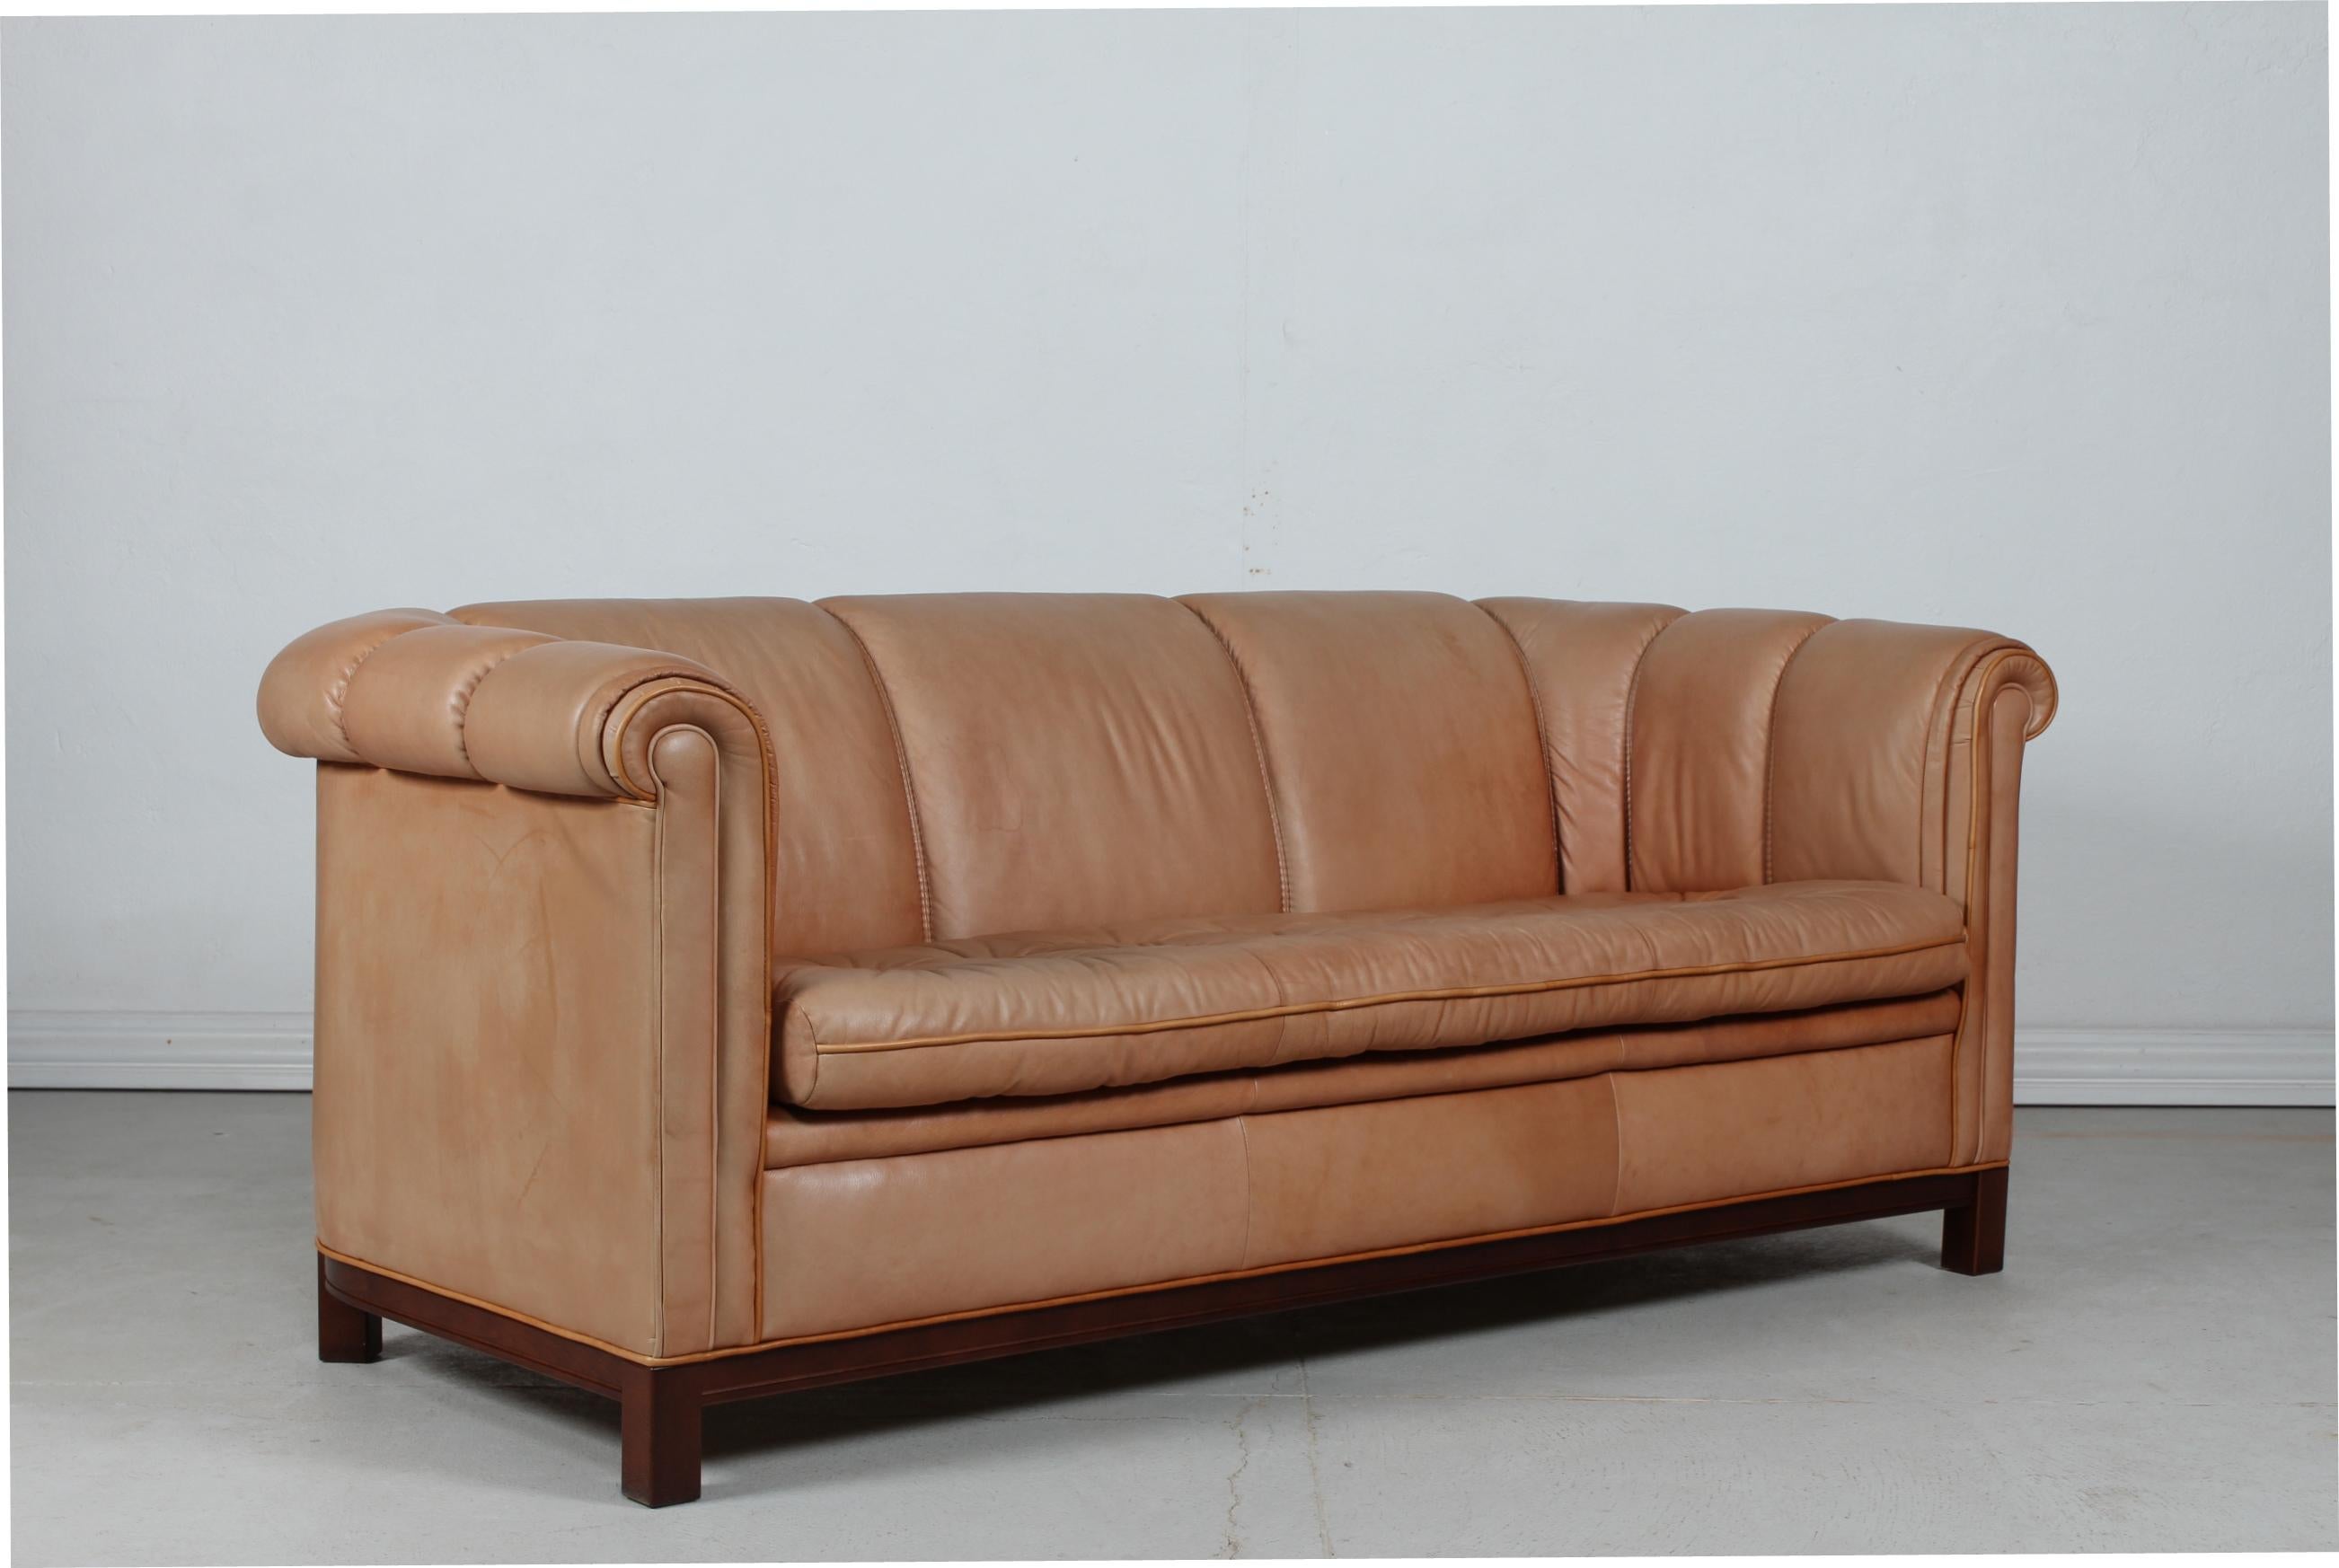 Danish Vintage Chesterfield Sofa and Couch Cognac Leather and Mahogany Frame, 1970s For Sale